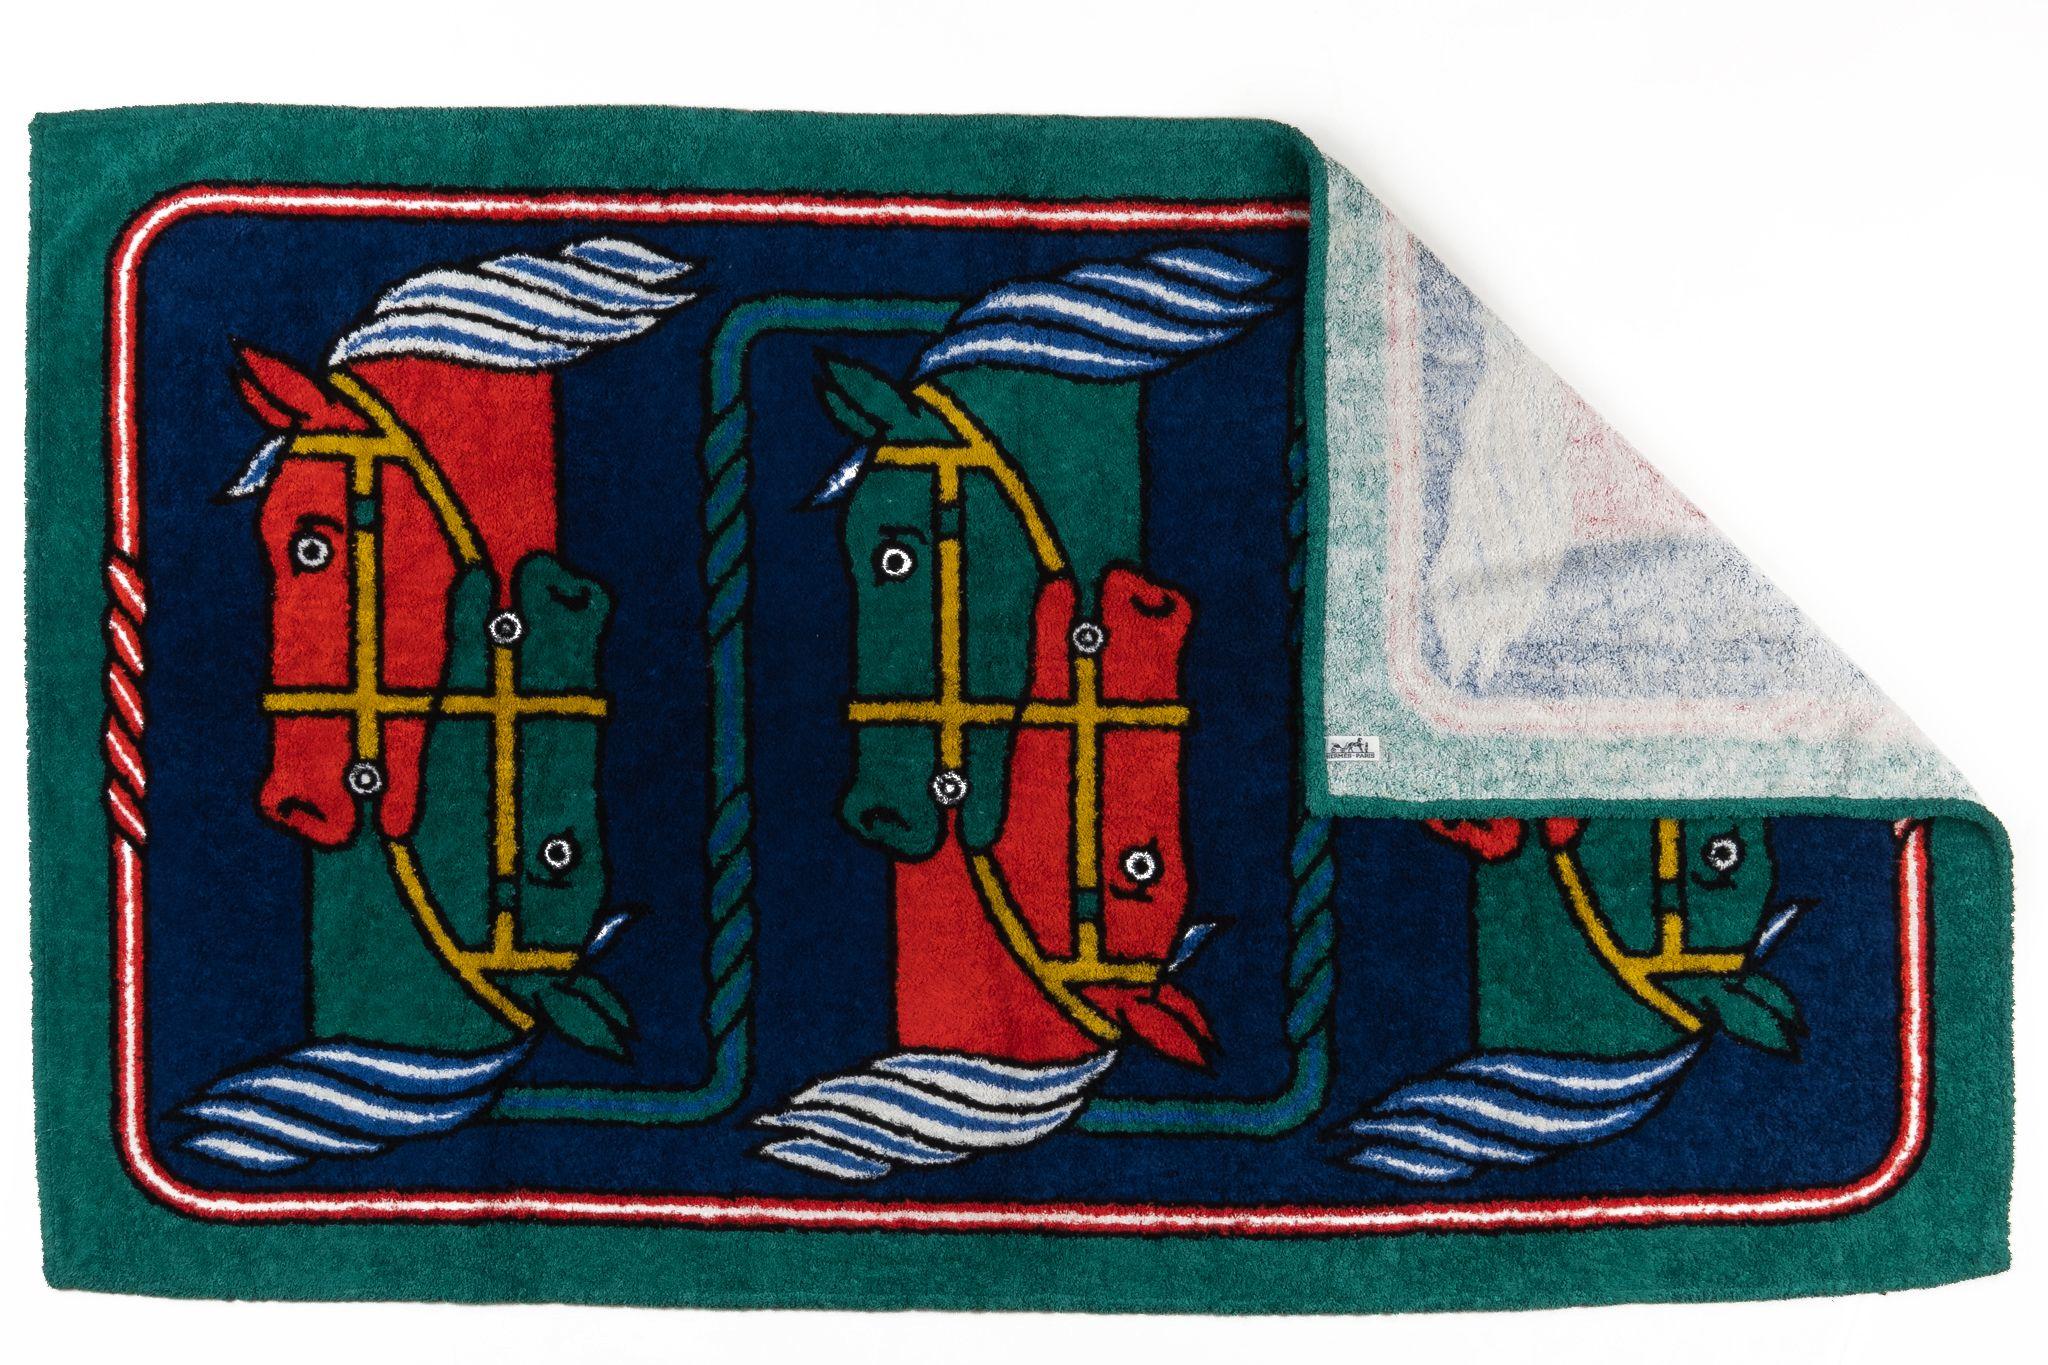 Hermès blue, green and red horses cotton beach towel.